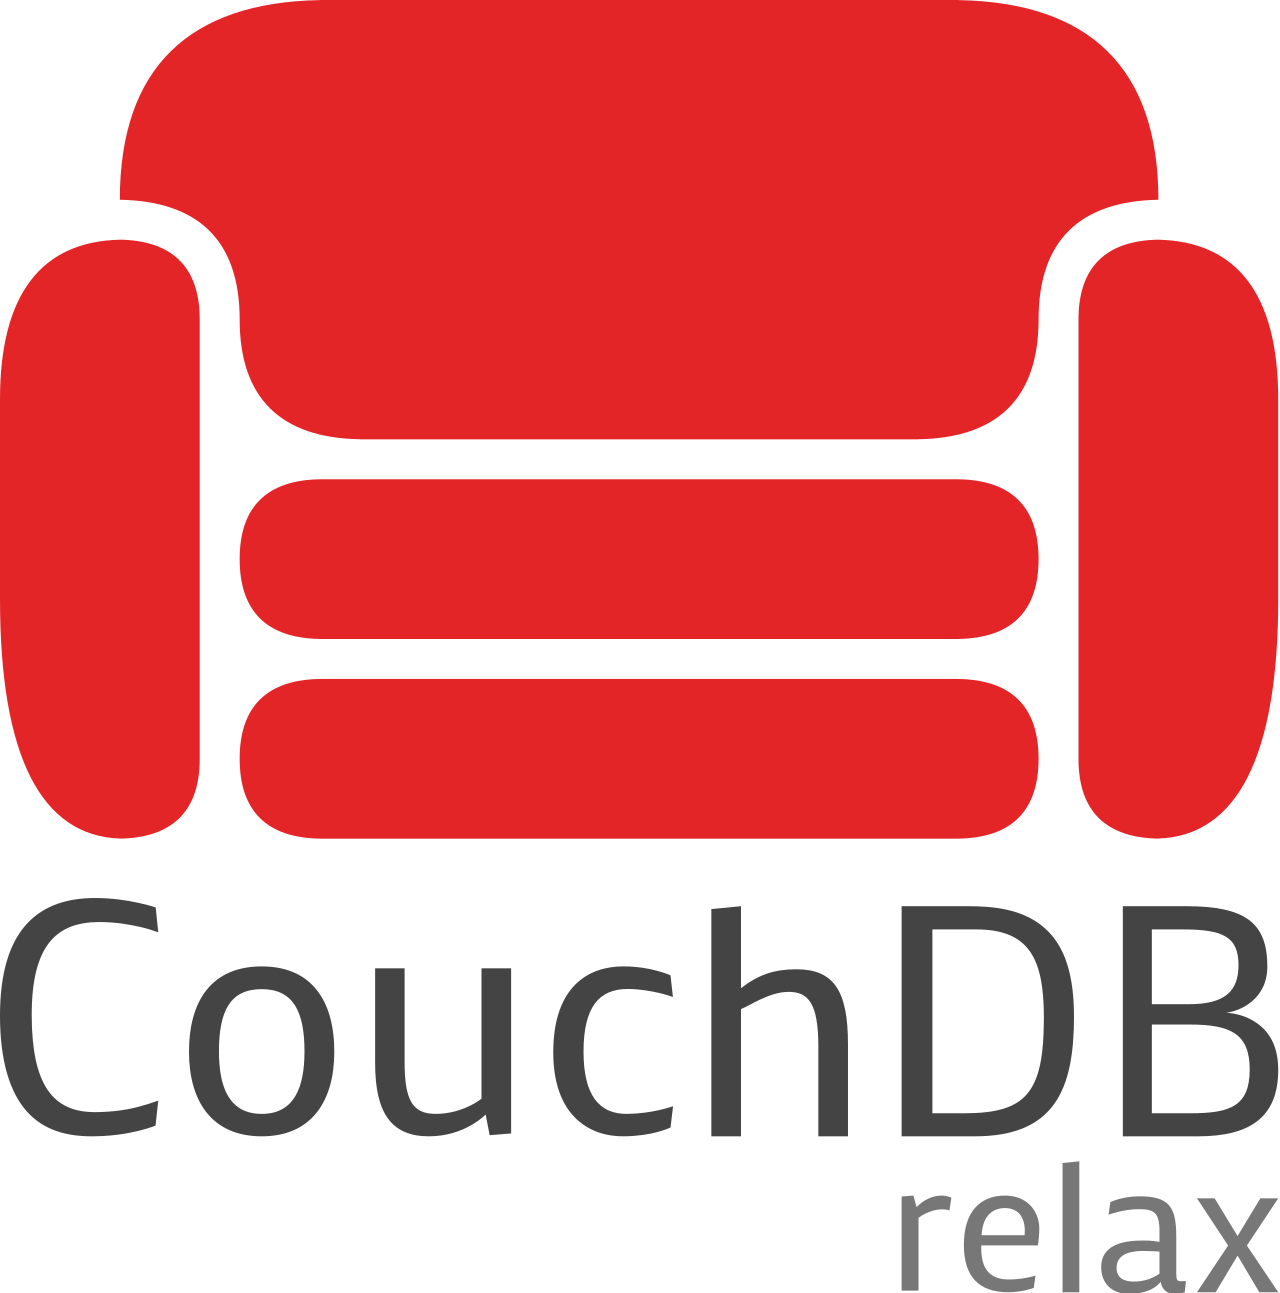 Couchdb Is A Few Years Older Than Mongodb, But Uses - Couchdb Relax (1280x1293)